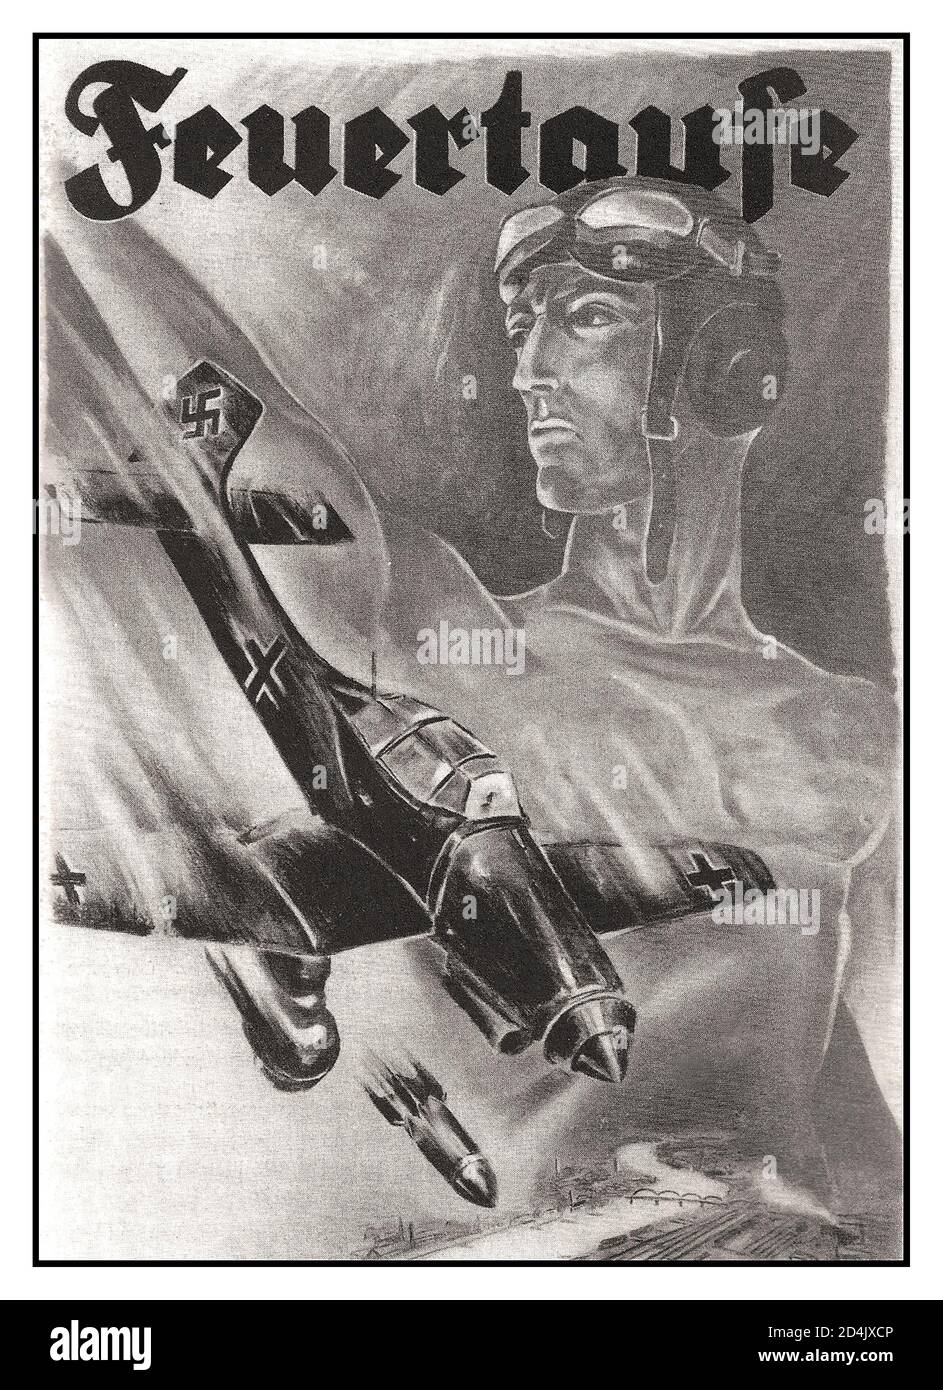 NAZI STUKA DIVE BOMBER WW2 'Feuertaufe' Nazi Luftwaffe Recruitment Propaganda Poster 'Baptism of Fire' featuring a Ju-87 Stuka dive bomber with Swastika tail fin. Hitler's infamous blitzkrieg. Second World War World War II. Baptism of Fire - The Propaganda film by the same name from the deployment of our Stuka air force in the Polish campaign 1940 Stock Photo